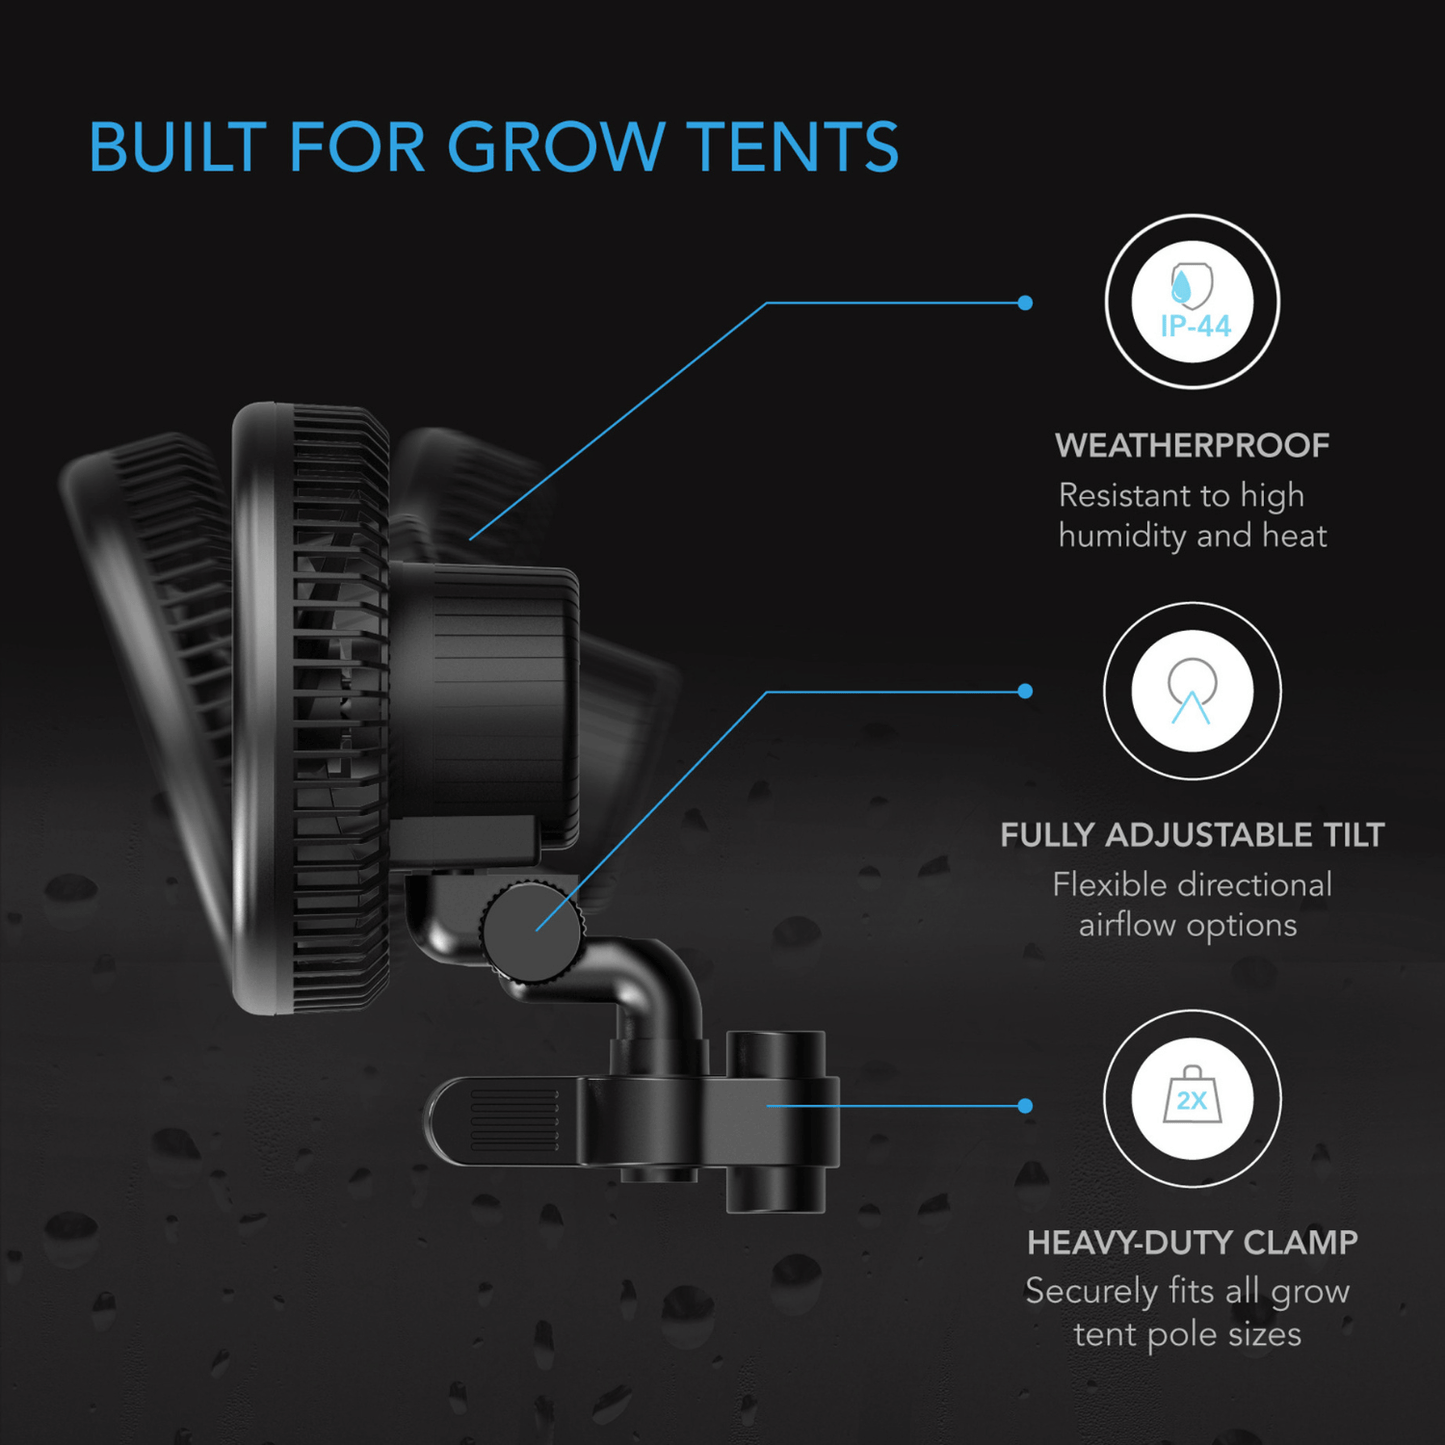 AC Infinity CLOUDRAY A9, Grow Tent Clip Fan 9" with 10 Speeds, EC-Motor, Manual Swivel | AC-CCA9 | Grow Tents Depot | Climate Control | 819137022454